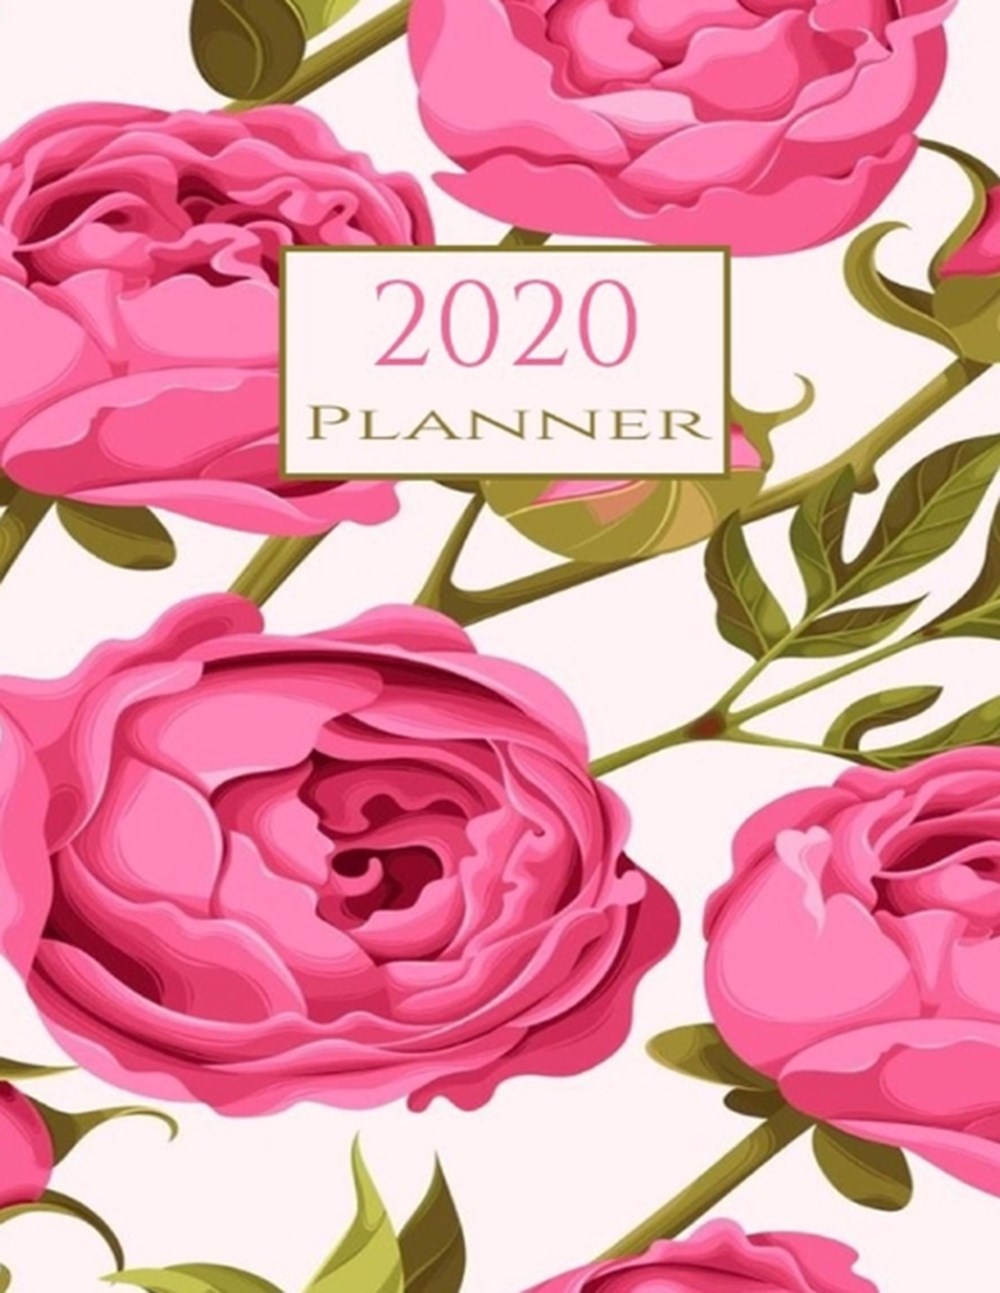 2020 Planner Pink Roses Floral 2020 Organizer Weekly and Monthly; Weekly ad Monthly 2020 Planner